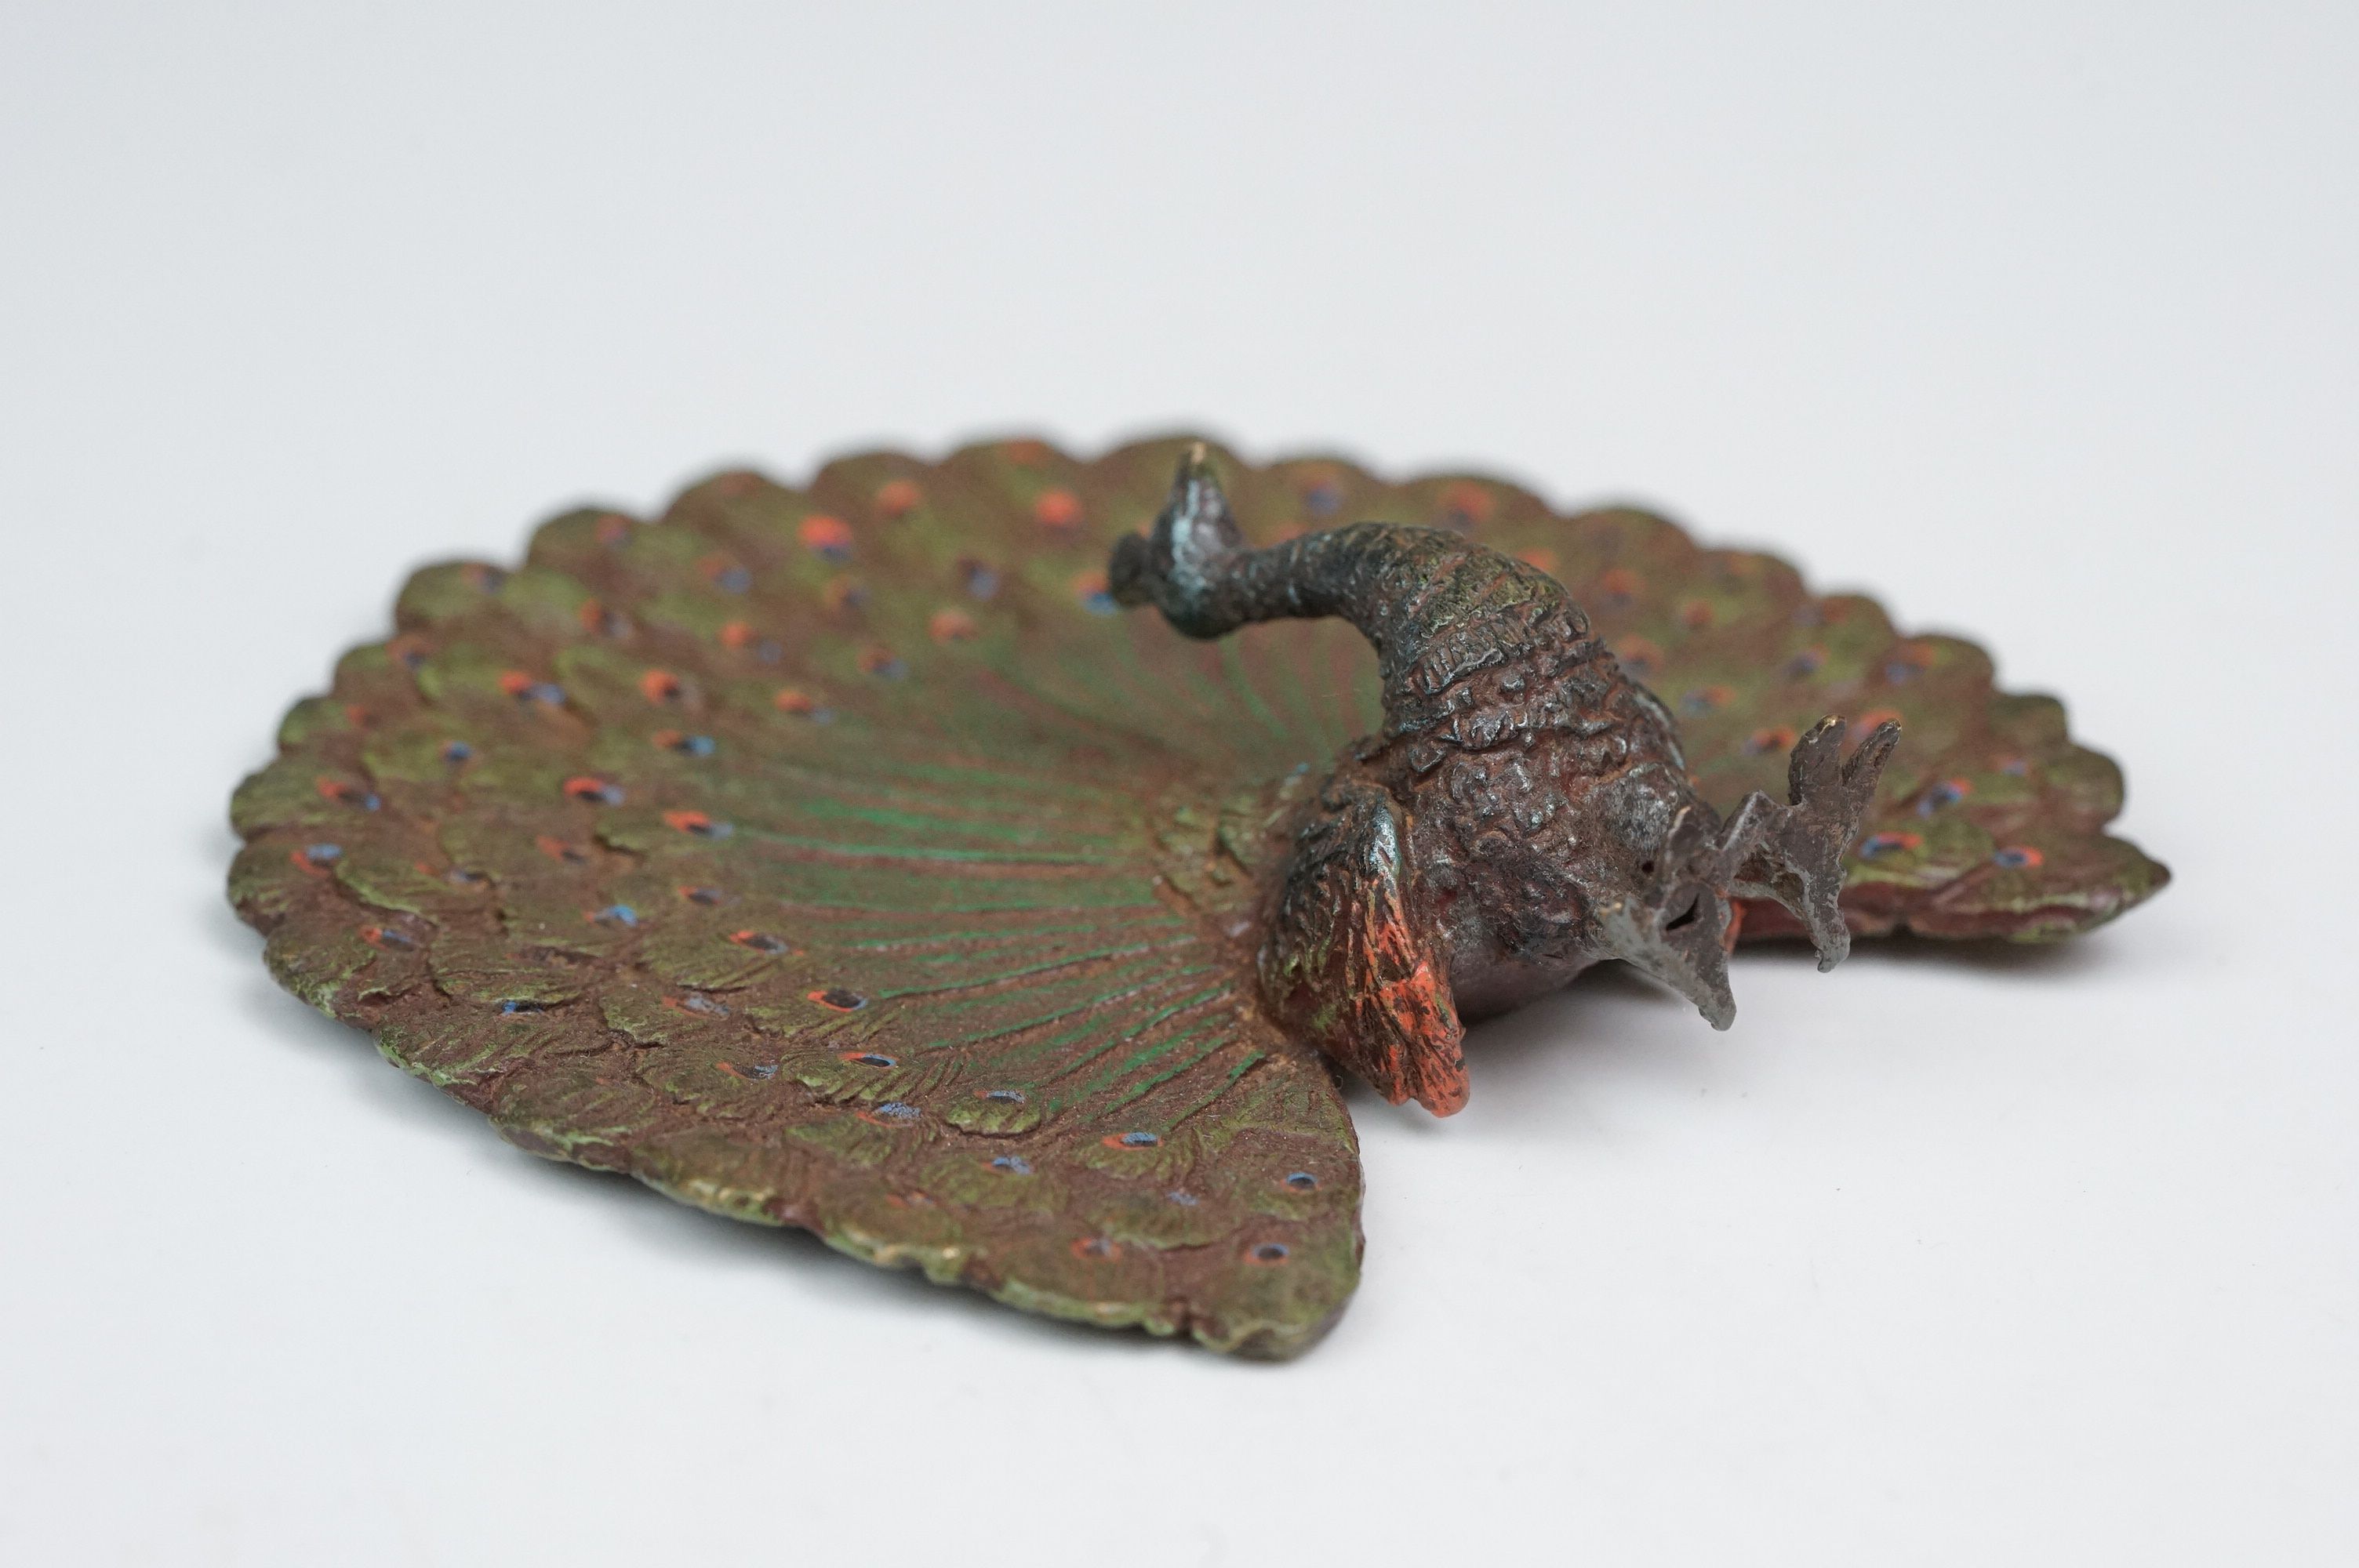 Cold painted bronze figure of a peacock with extended feathers - Image 5 of 6